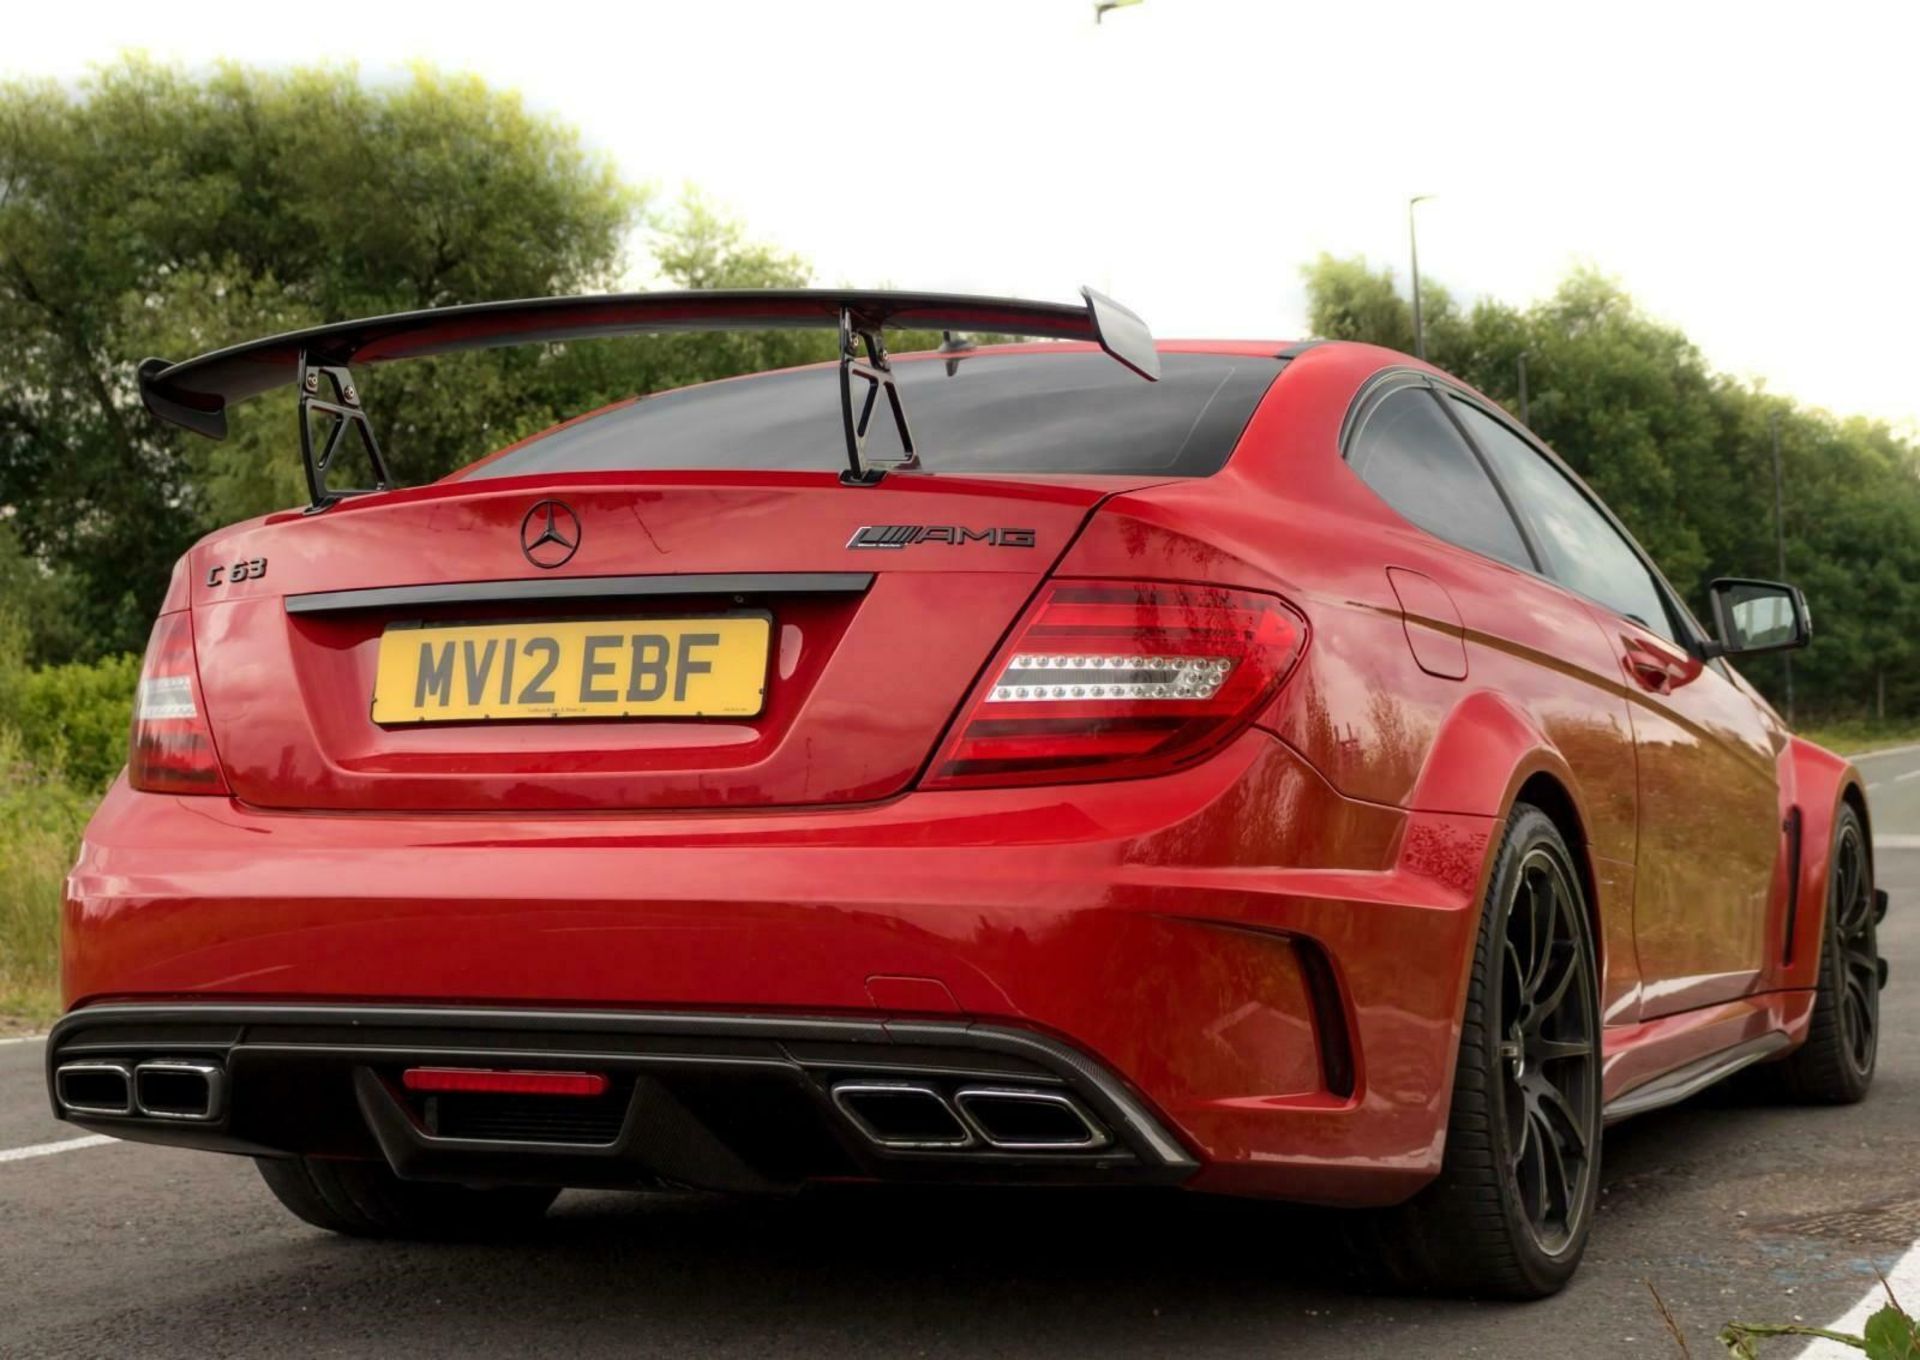 MERCEDES-BENZ C63 AMG BLACK SERIES (1 OF 600 MADE) - Image 5 of 12